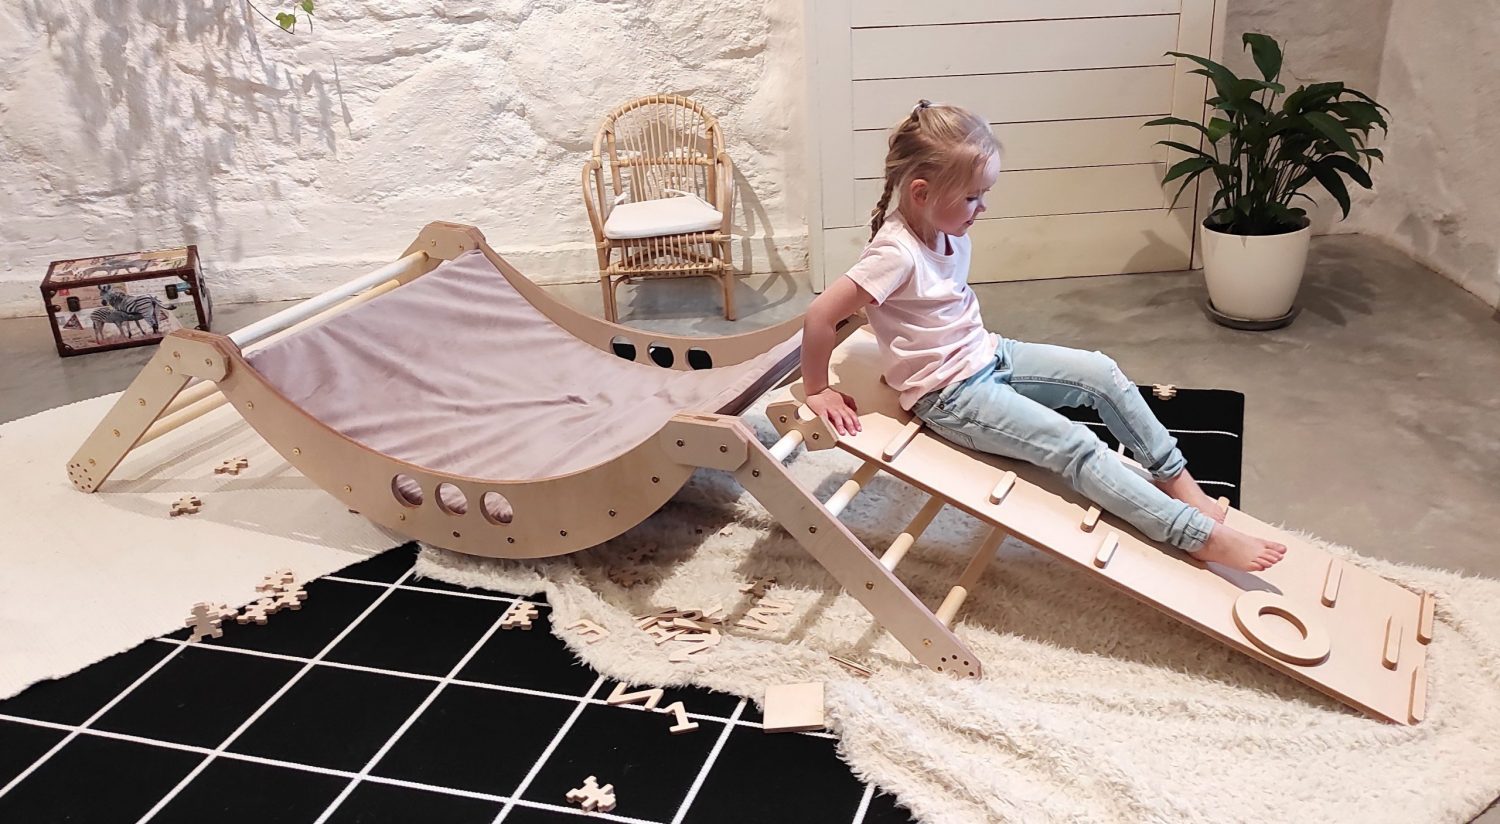 Inspired by Pickler's theory Indoor Climbing Triangle Set - Play Gym & Playhouse for Toddlers HILLTOWN CLIMBER from Luula